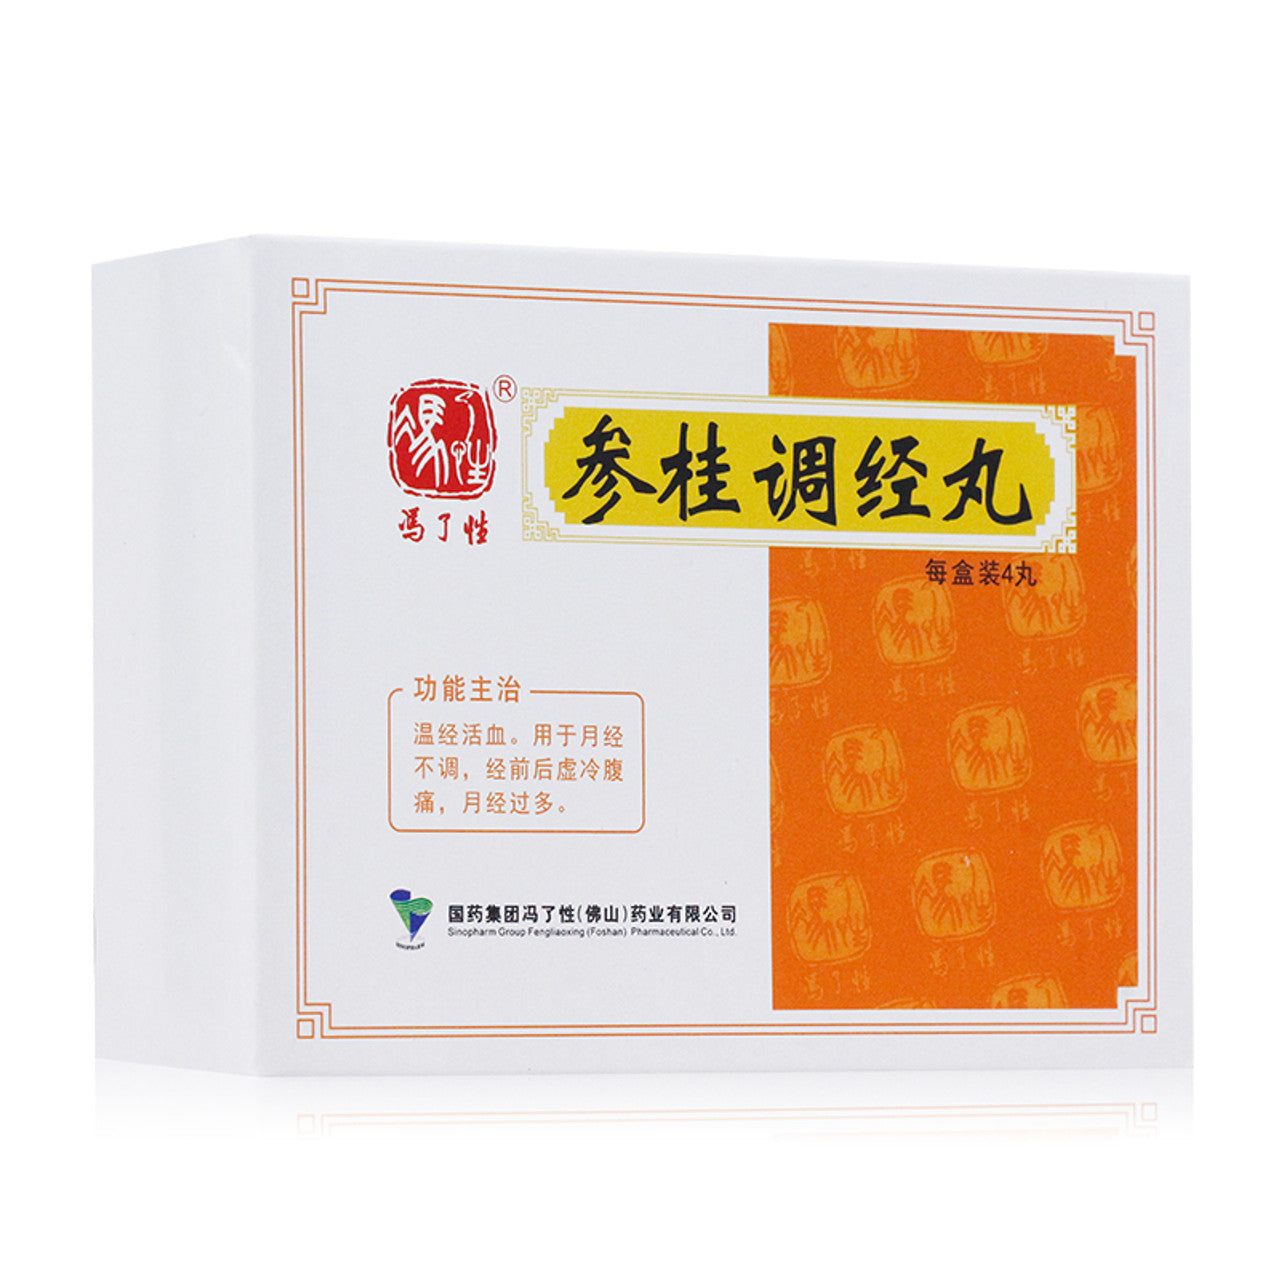 China Herb. Brand Fengliaoxing. Shengui Tiaojjng Wan or Shen Gui Tiao Jing Wan or Shengui Tiaojjng Pills or Shen Gui Tiao Jing Pills for irregular menstruation, cold before and after menstruation, abdominal pain, and menorrhagia.